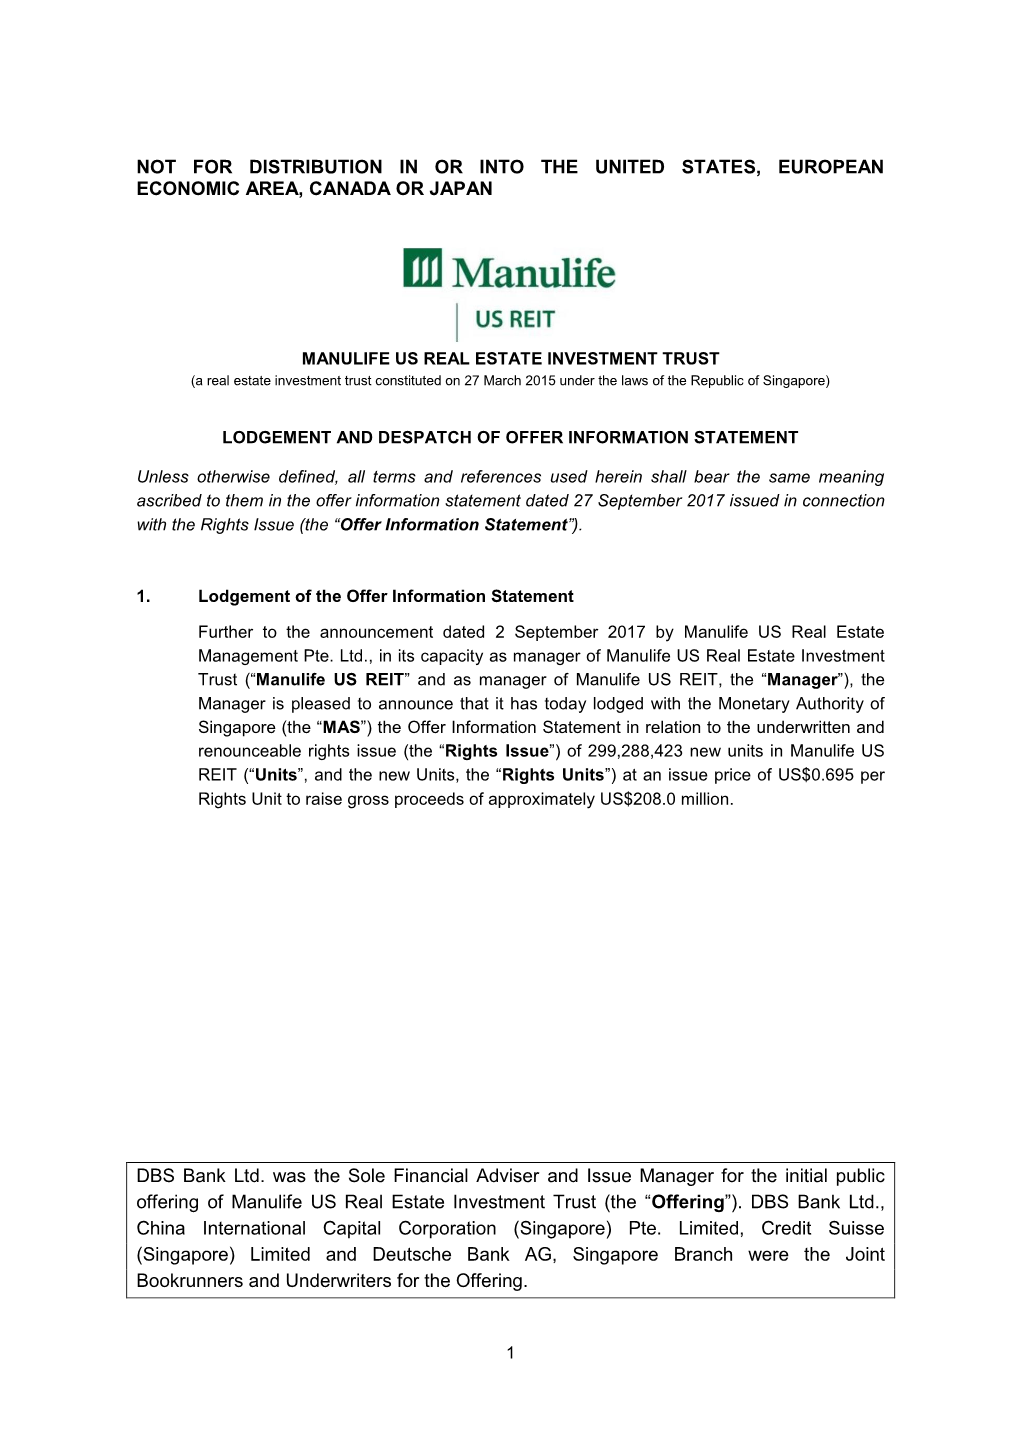 DBS Bank Ltd. Was the Sole Financial Adviser and Issue Manager for the Initial Public Offering of Manulife US Real Estate Investment Trust (The “Offering”)